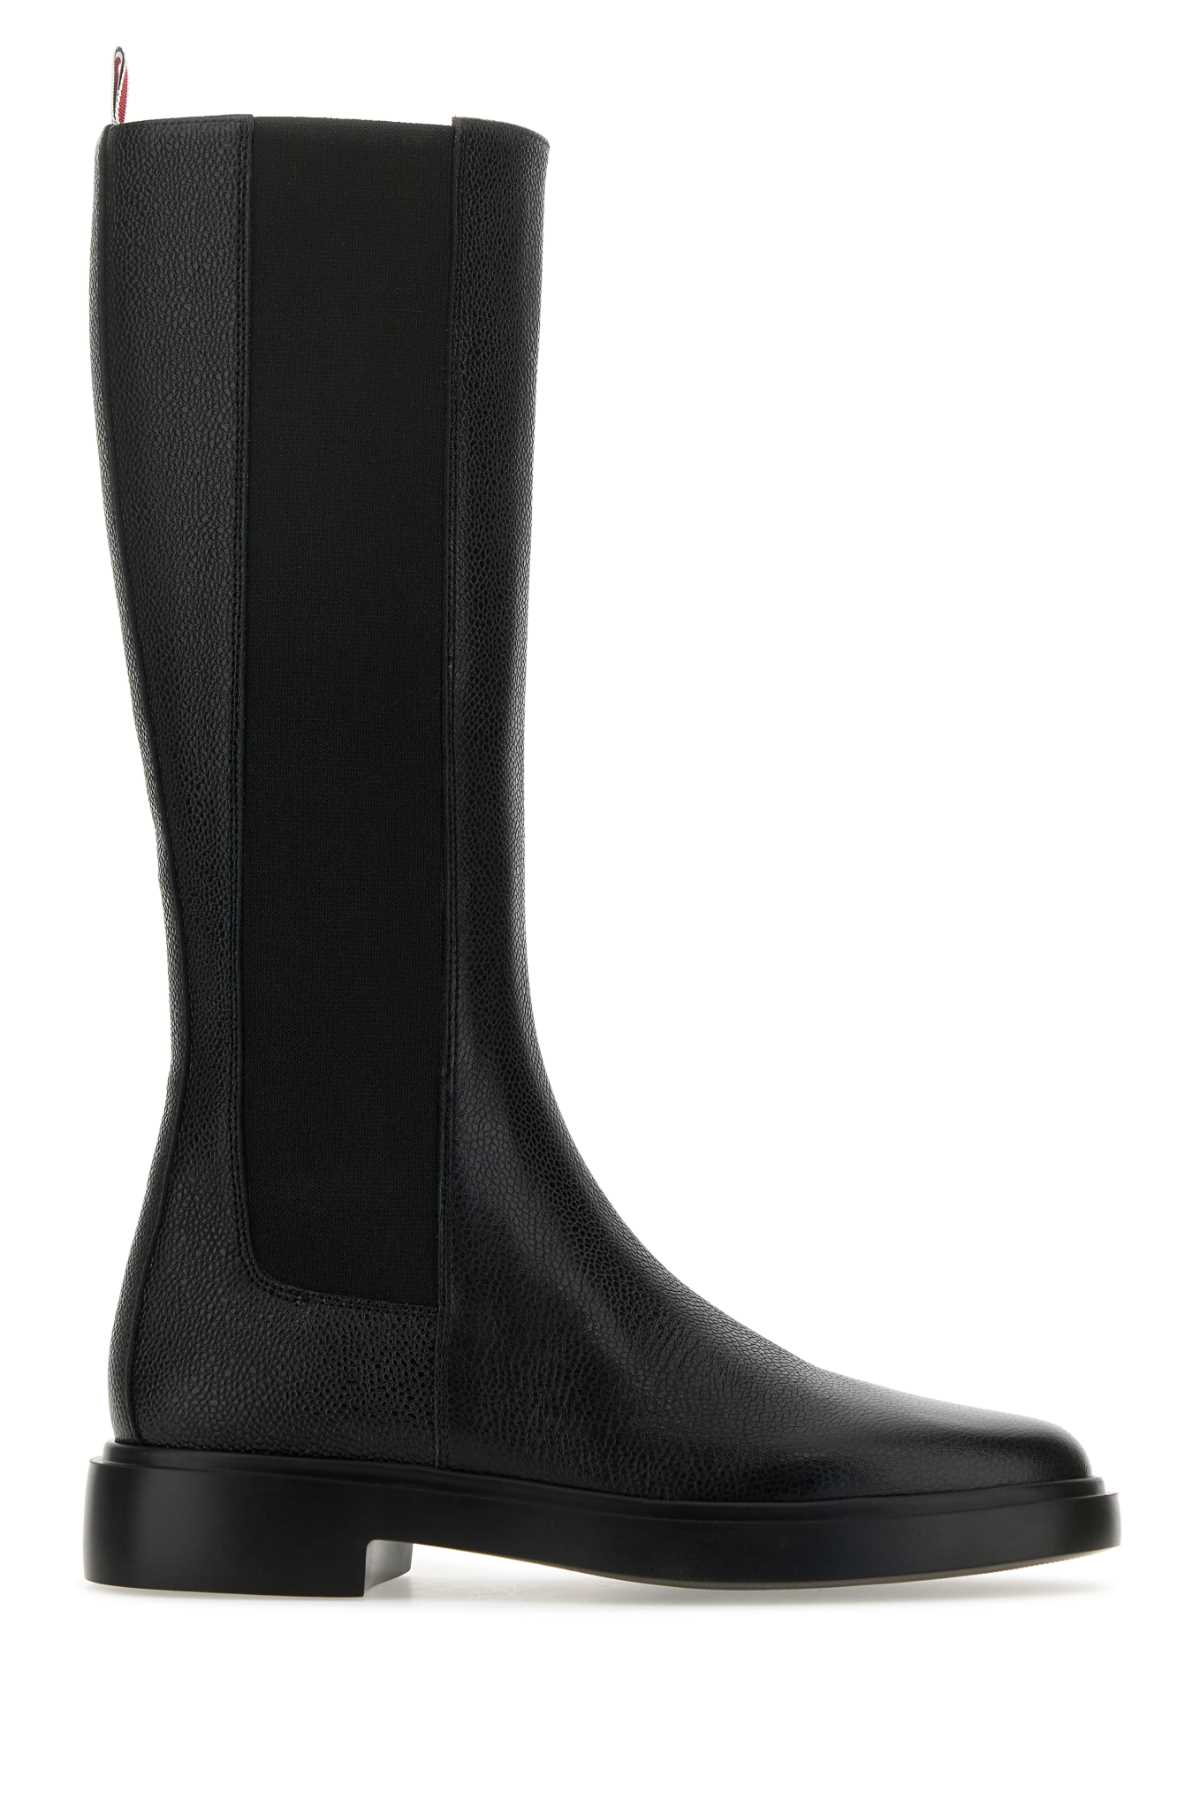 Thom Browne Black Leather Chelsea Boots In 001